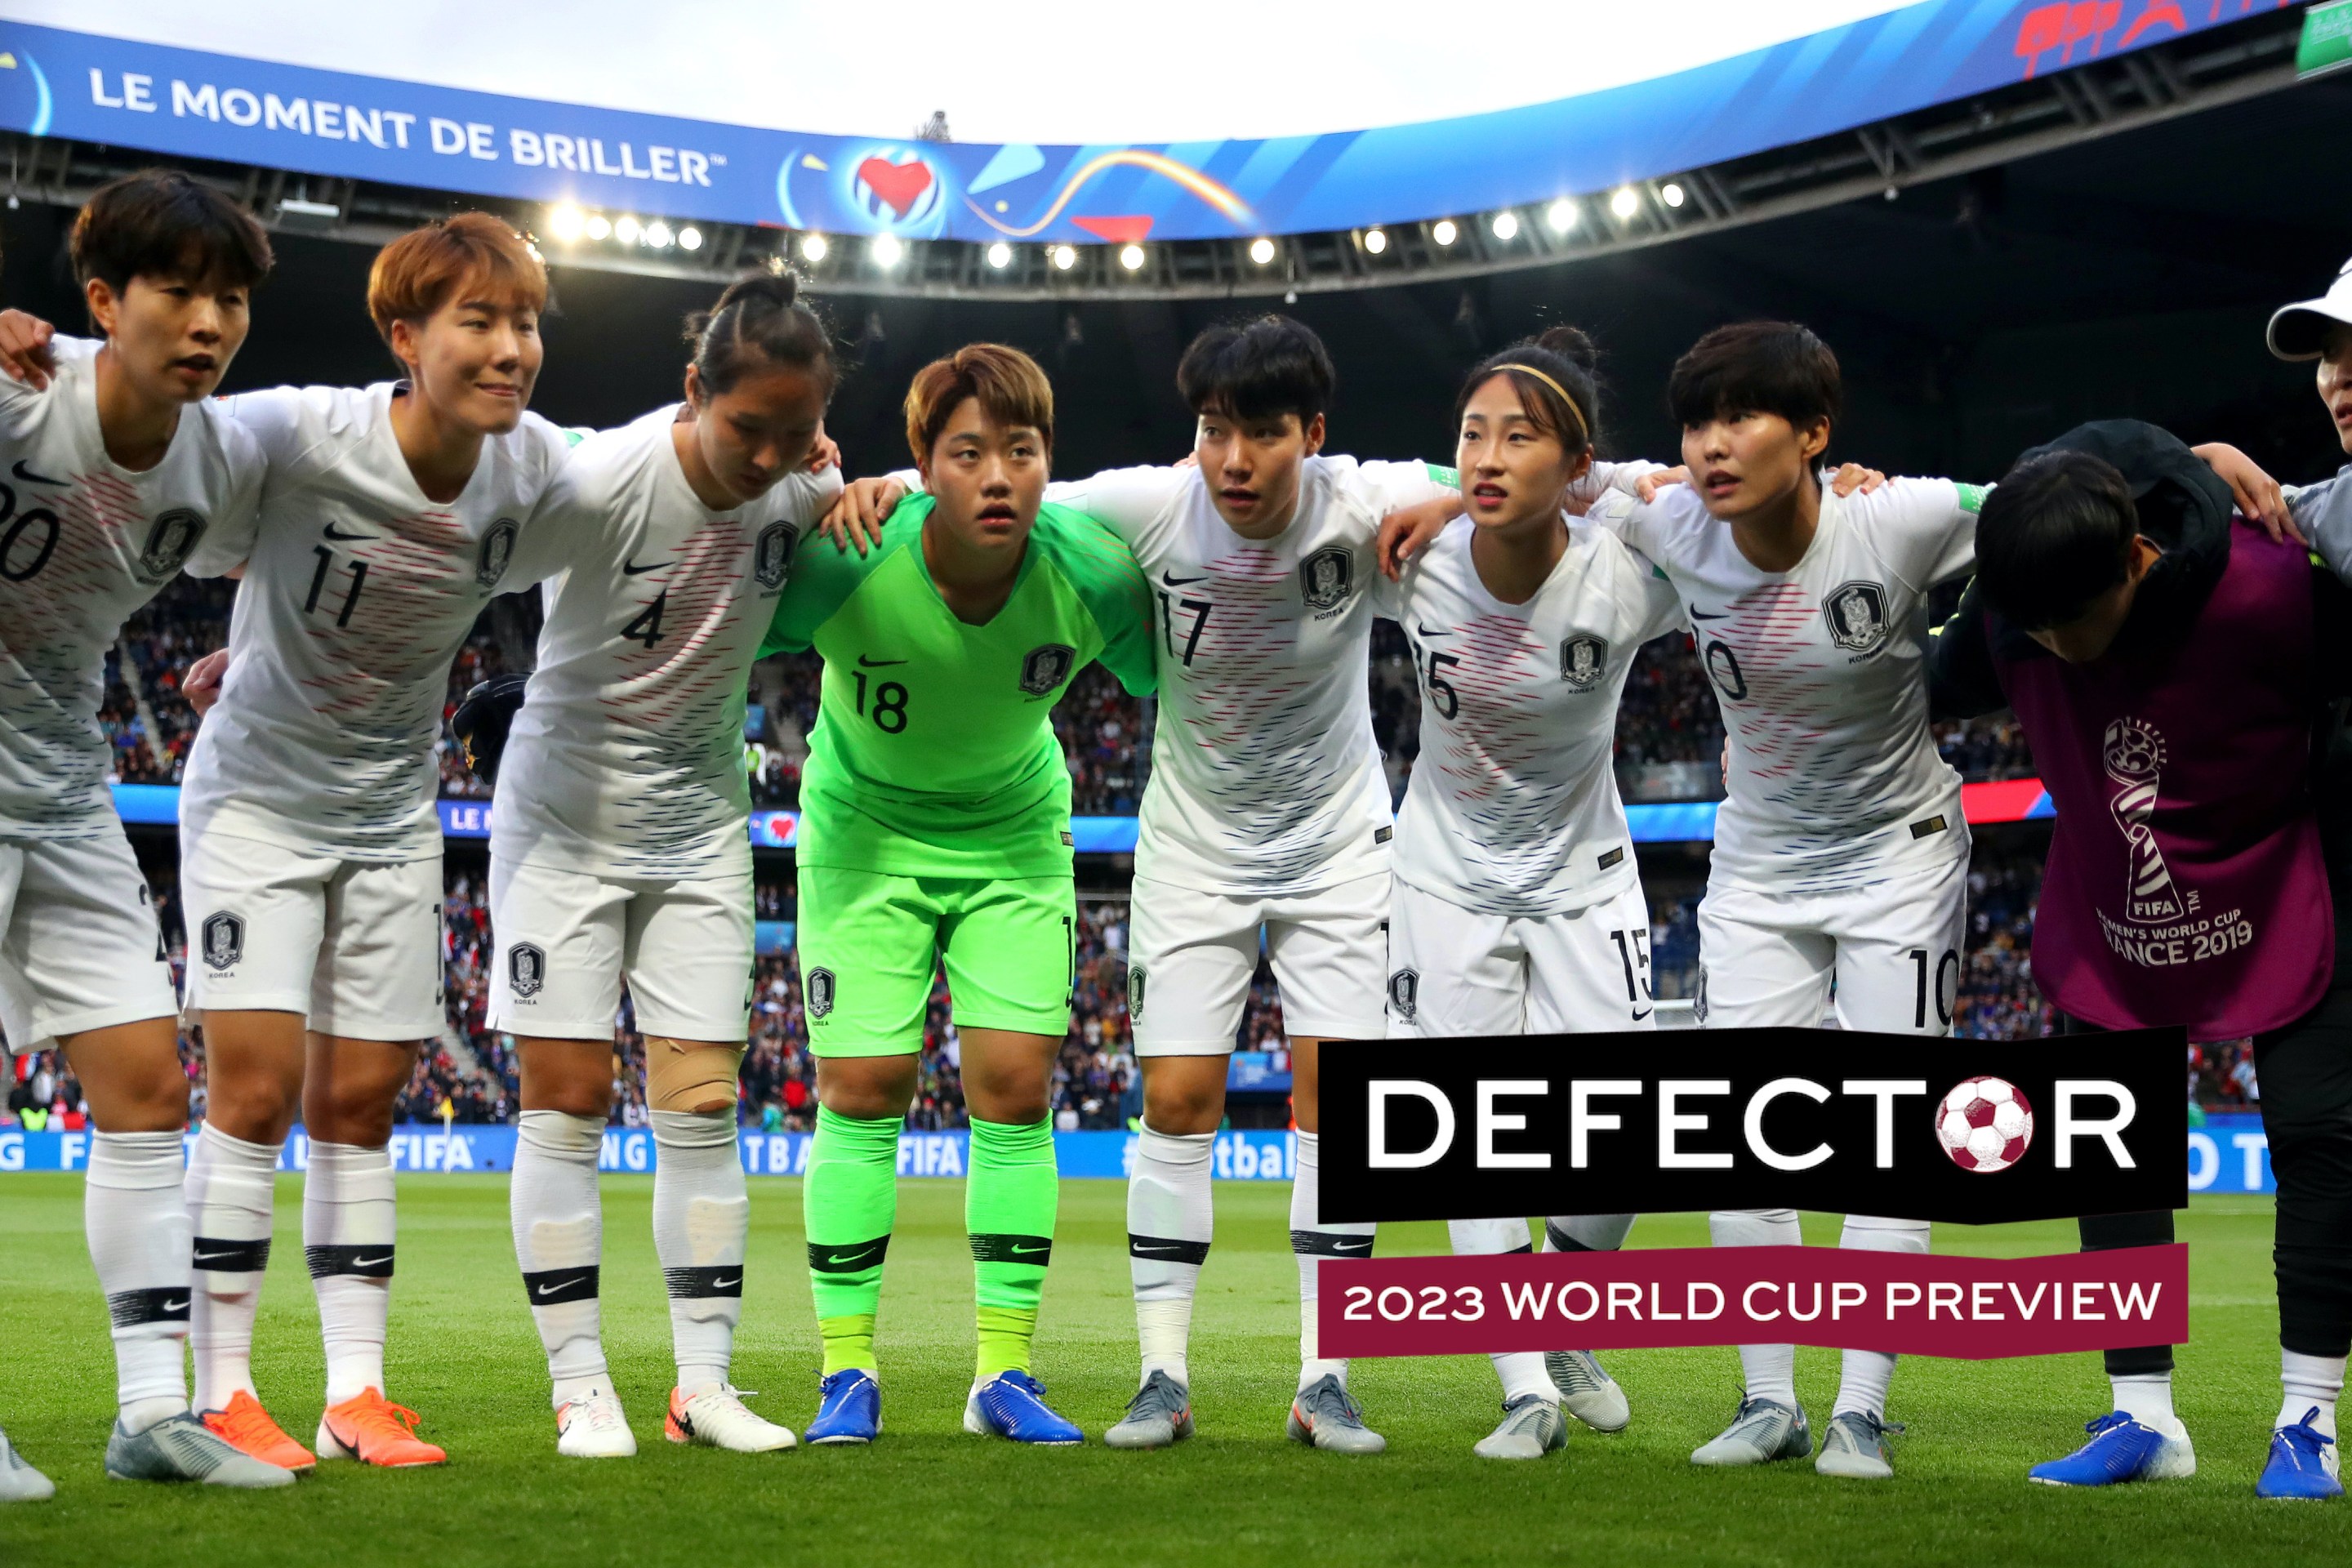 PARIS, FRANCE - JUNE 07: Players of Korea Republic huddle on the pitch prior to the 2019 FIFA Women's World Cup France group A match between France and Korea Republic at Parc des Princes on June 07, 2019 in Paris, France. (Photo by Catherine Ivill - FIFA/FIFA via Getty Images)